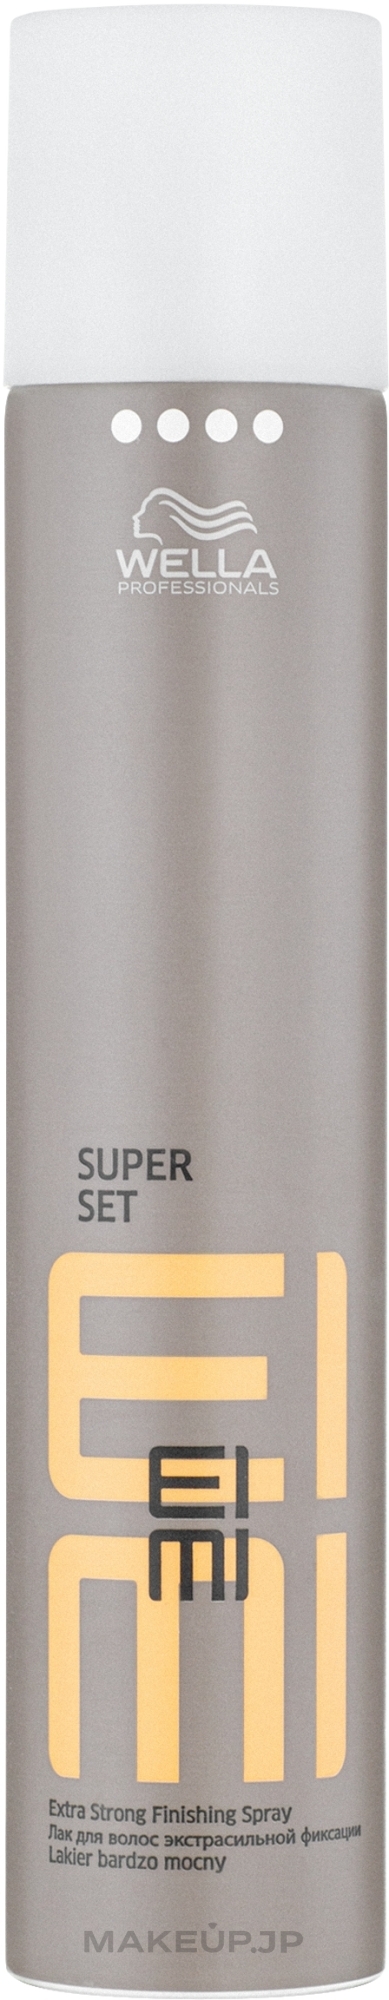 Extra Strong Hold Hair Spray - Wella Professionals EIMI Super Set — photo 300 ml